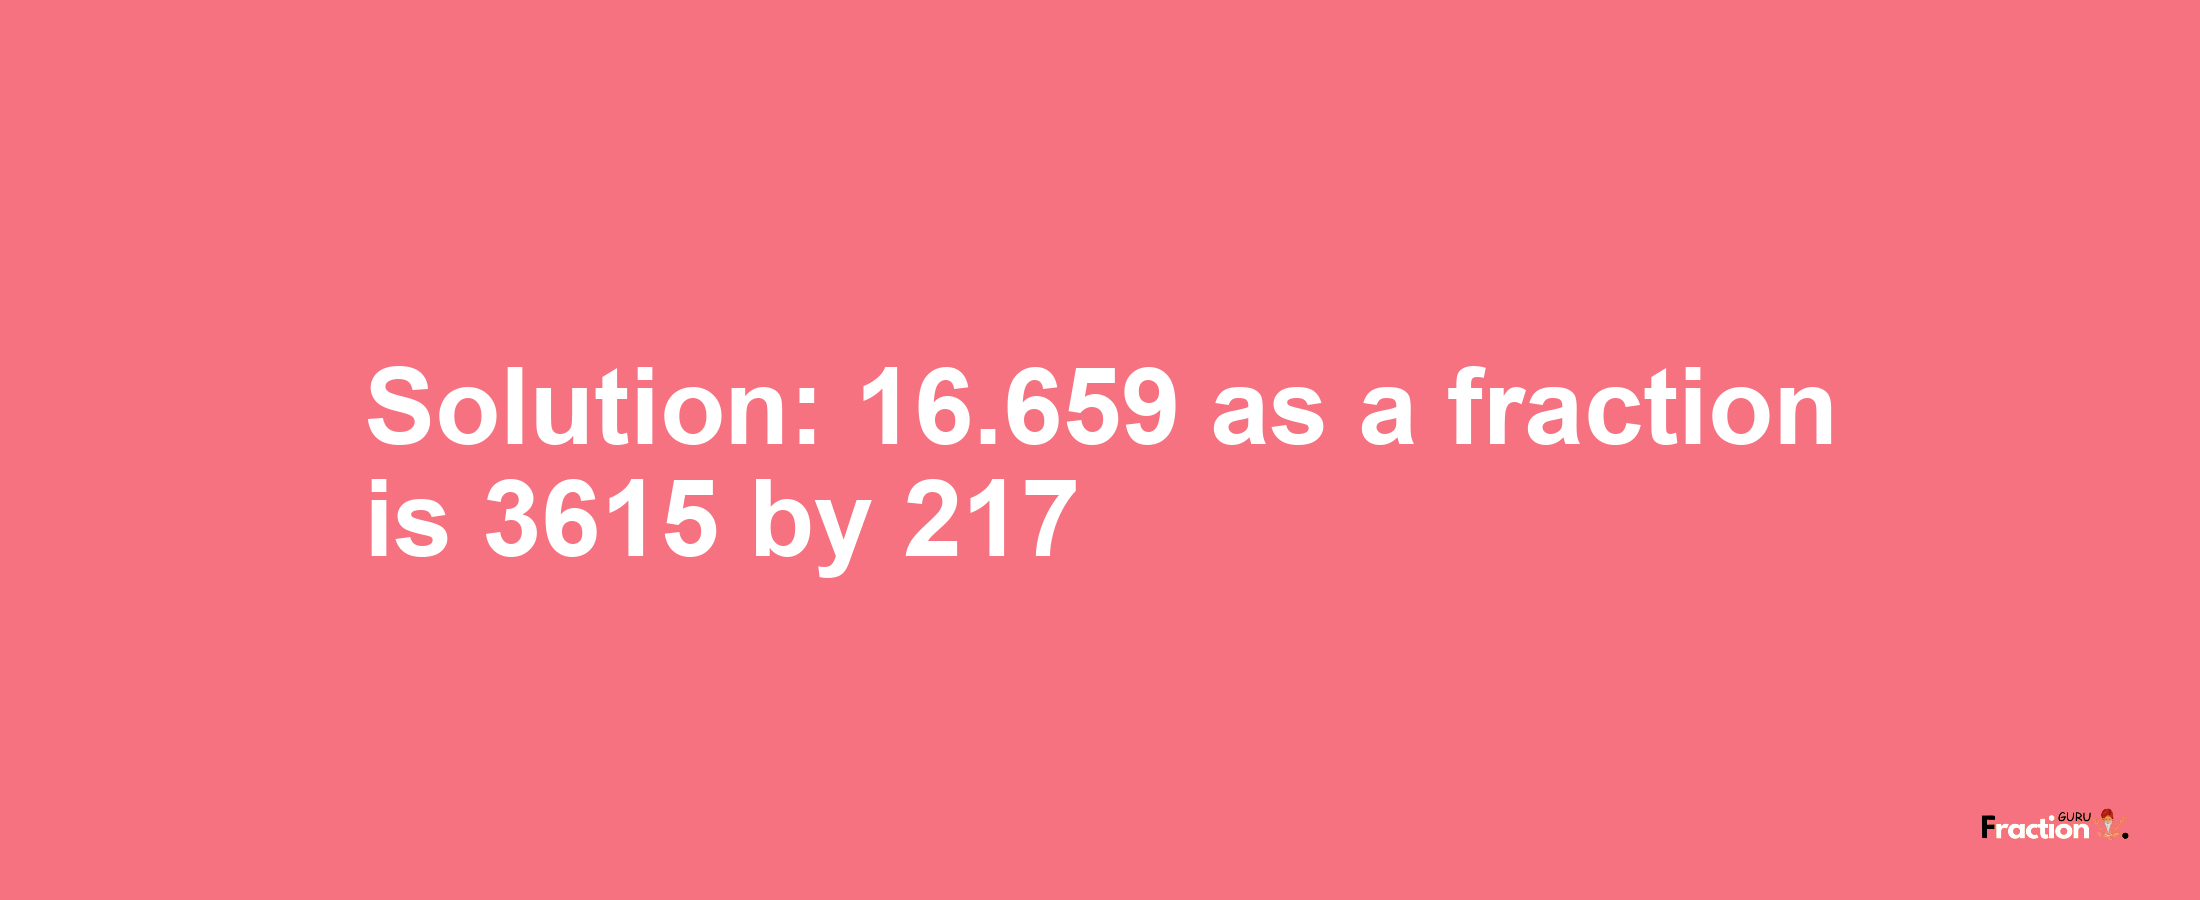 Solution:16.659 as a fraction is 3615/217